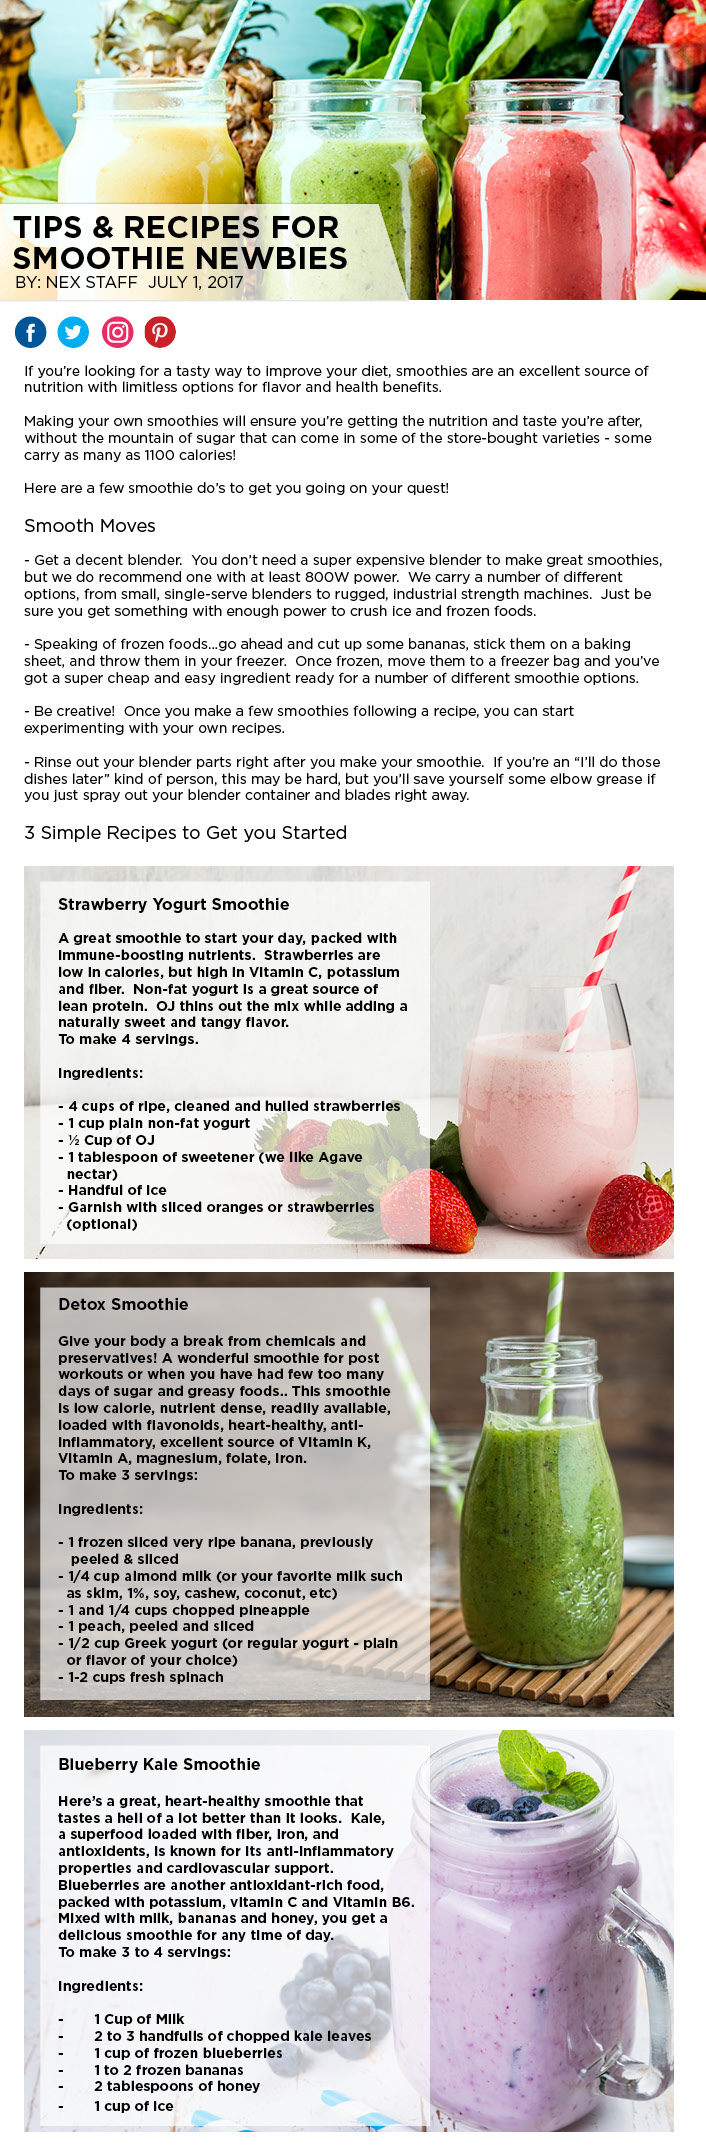 Tips and recipes for smoothie newbies